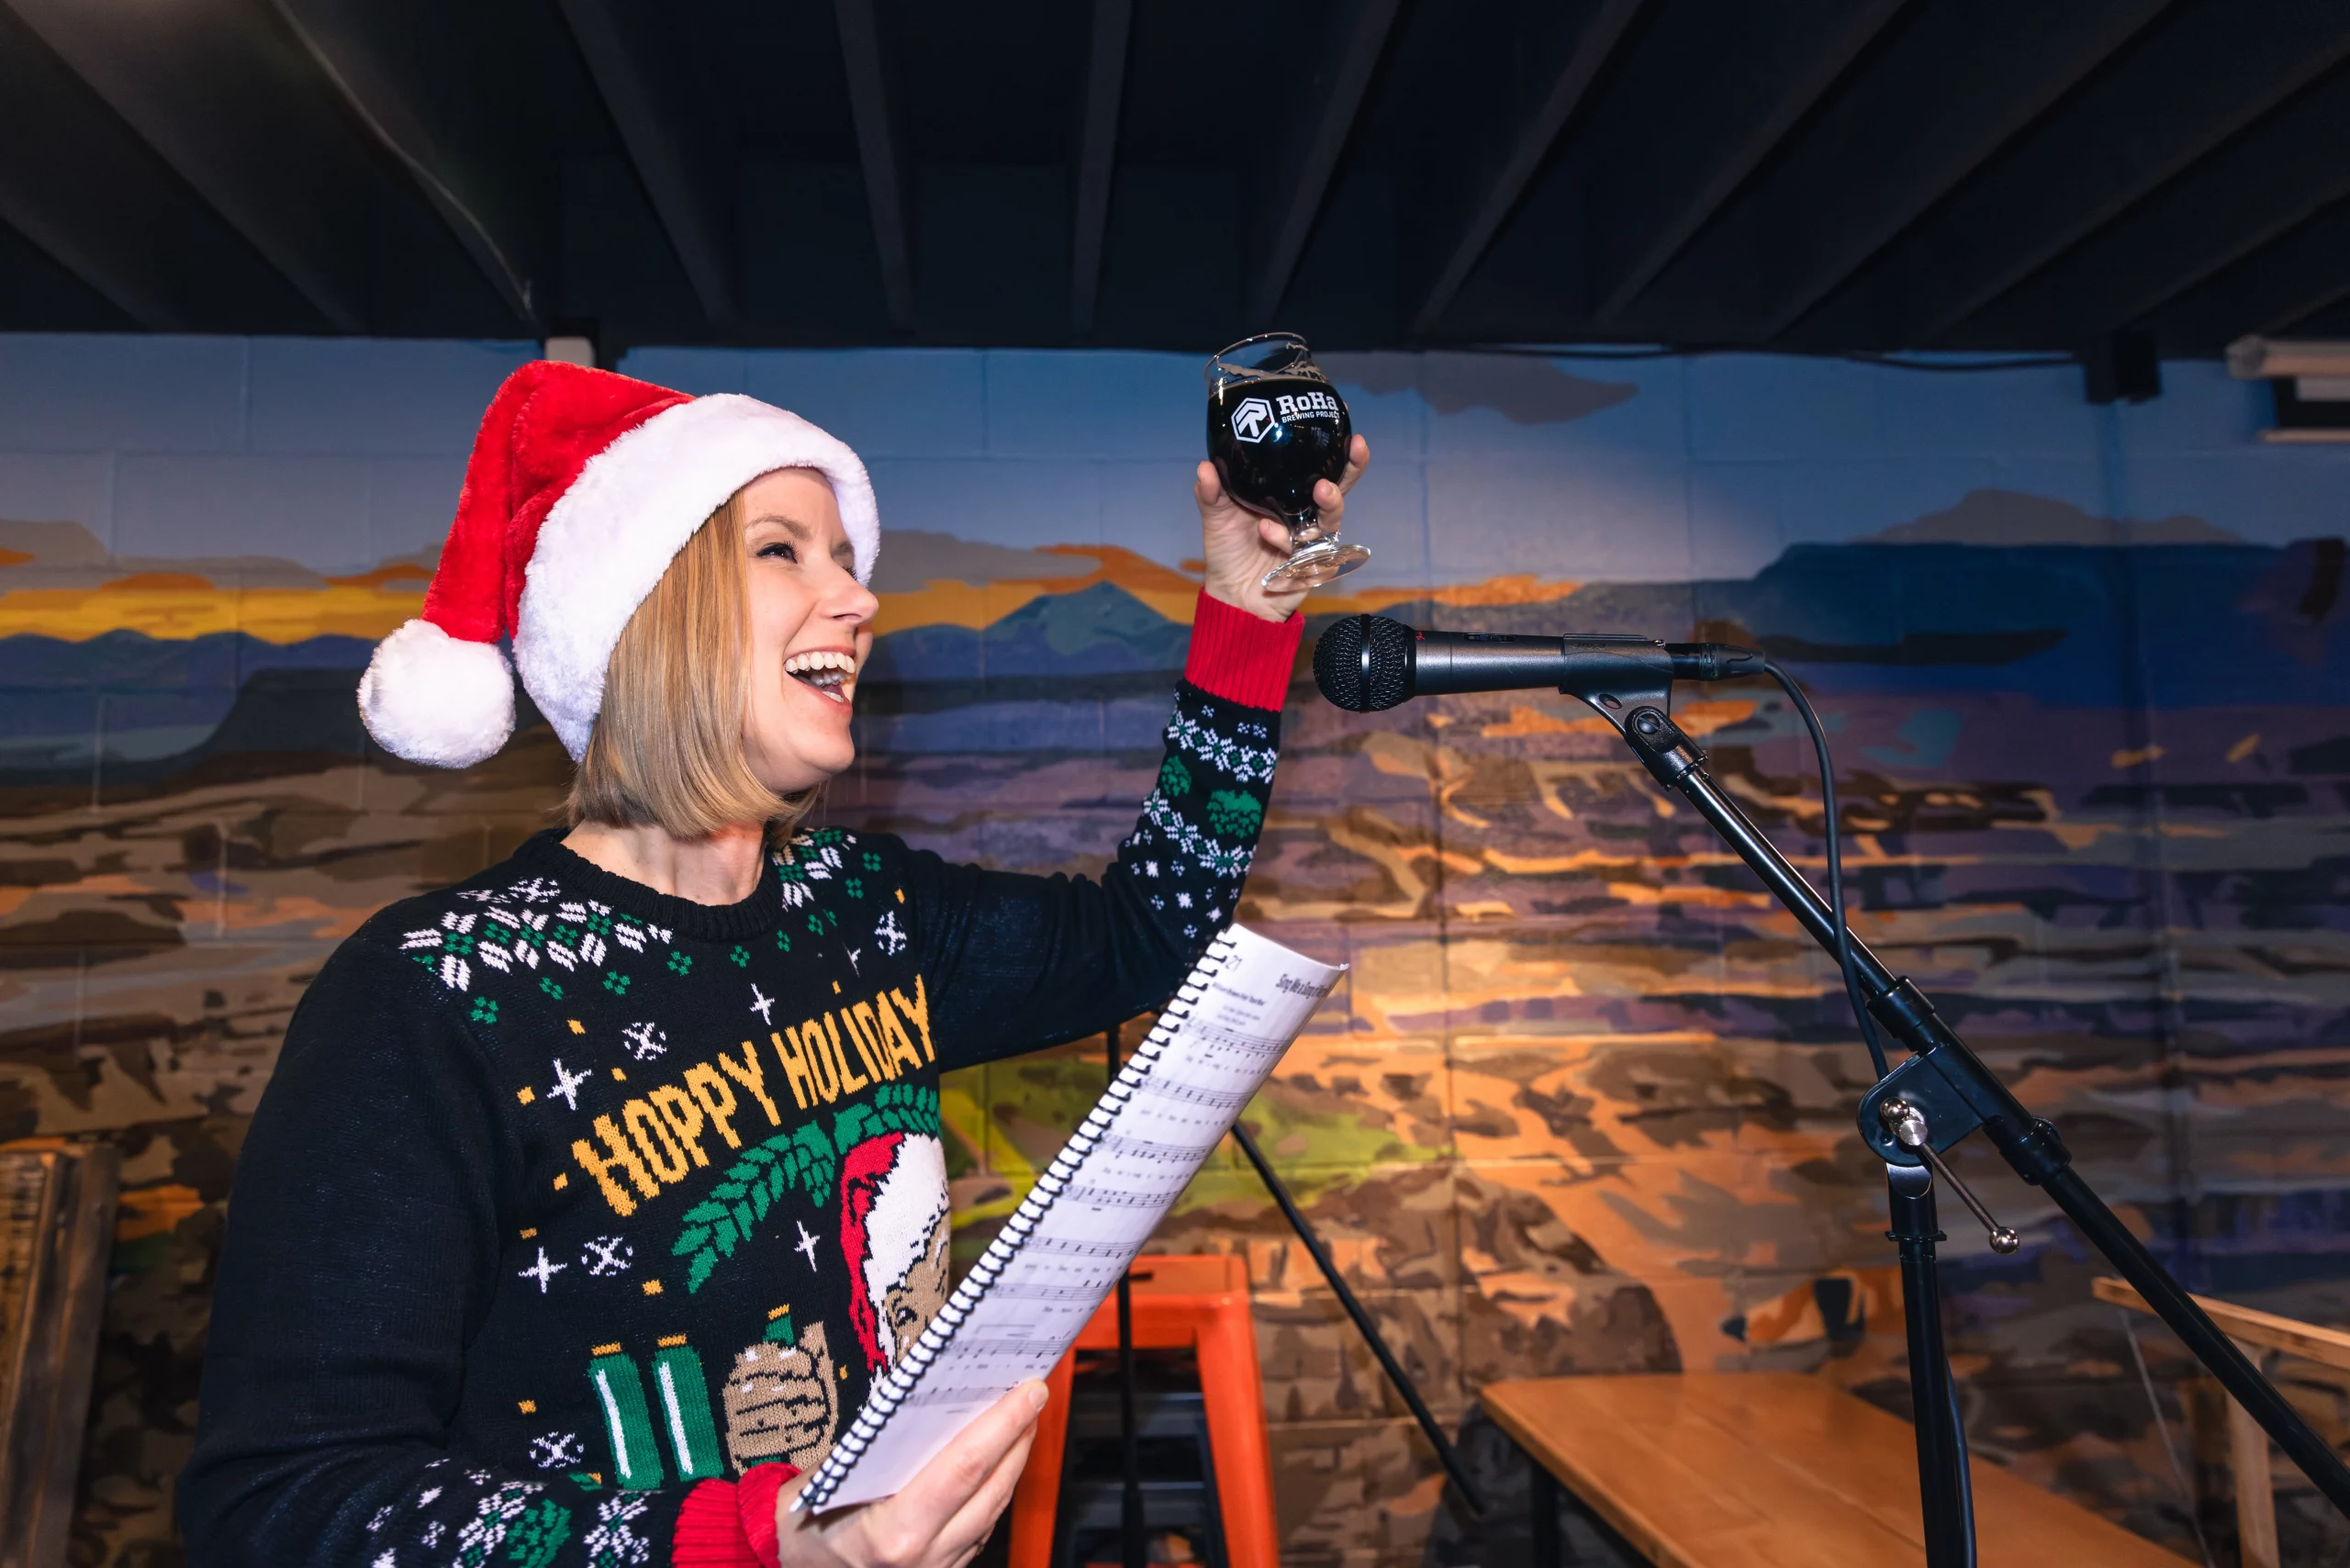 A woman in a Santa hat and an ugly Christmas sweater stands in front of a mic holding sheet music in one hand, a beer raised in the other.